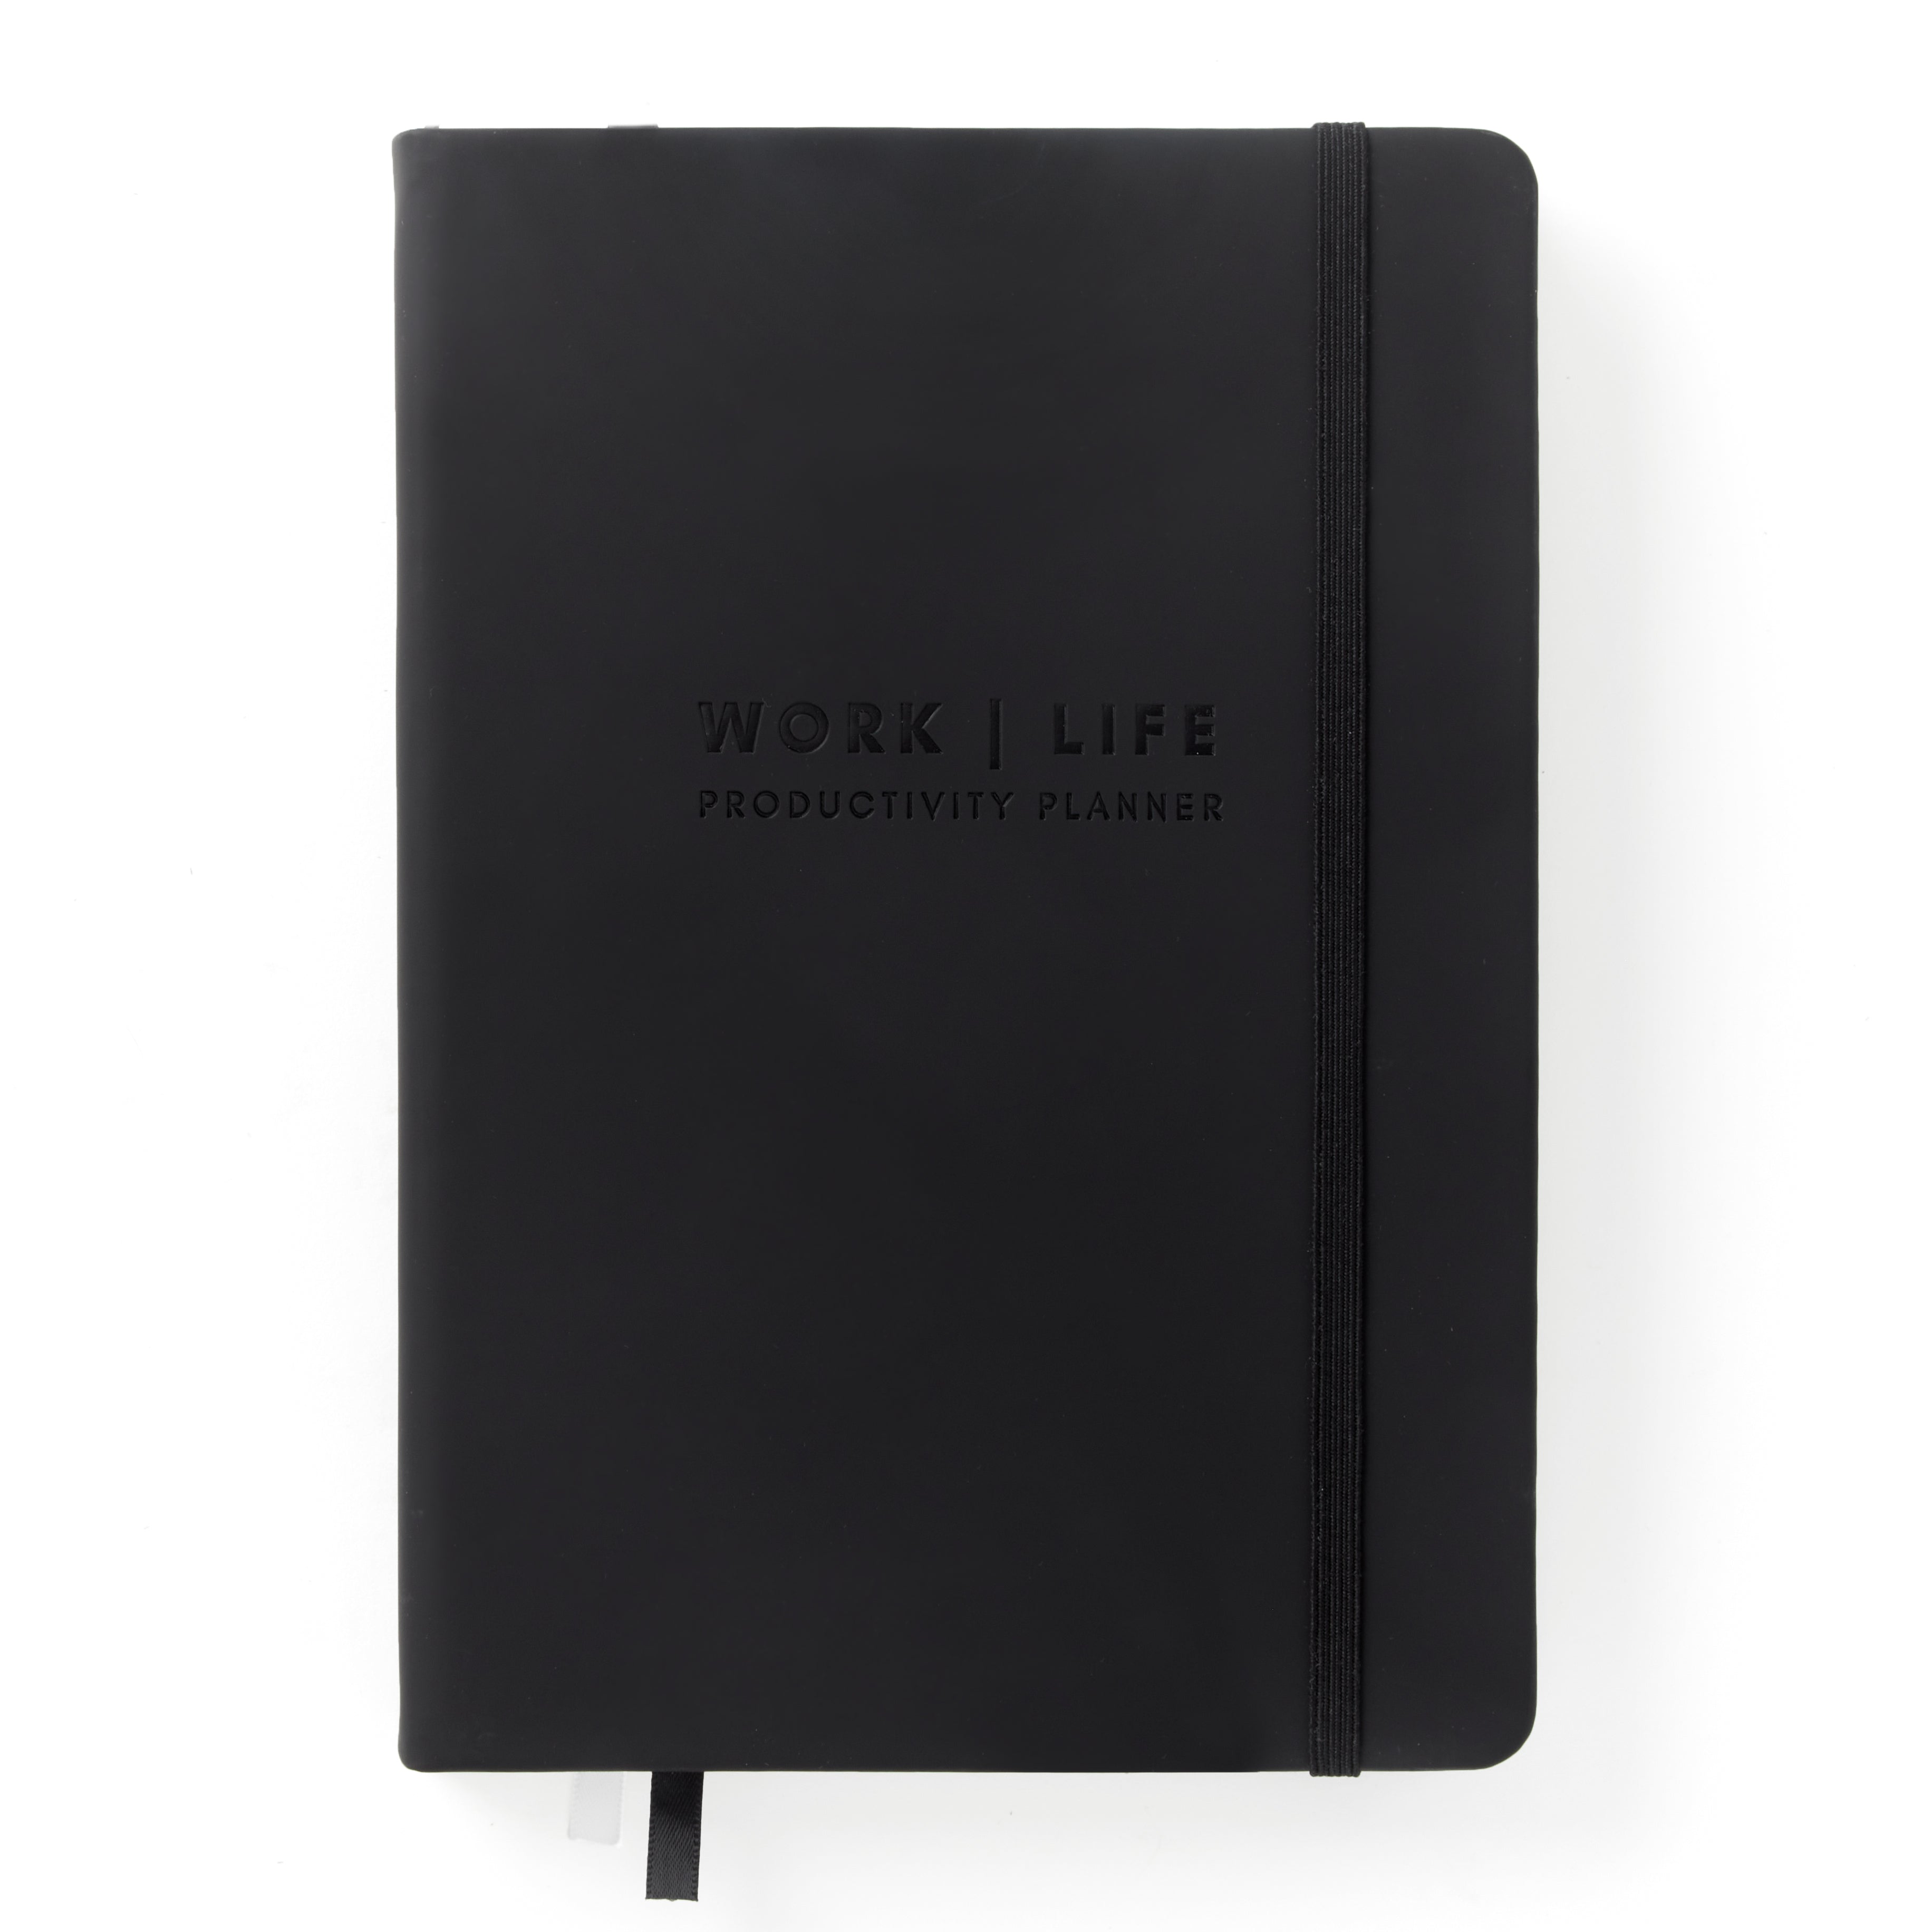 Take Control of Your Life with a Productivity Planner